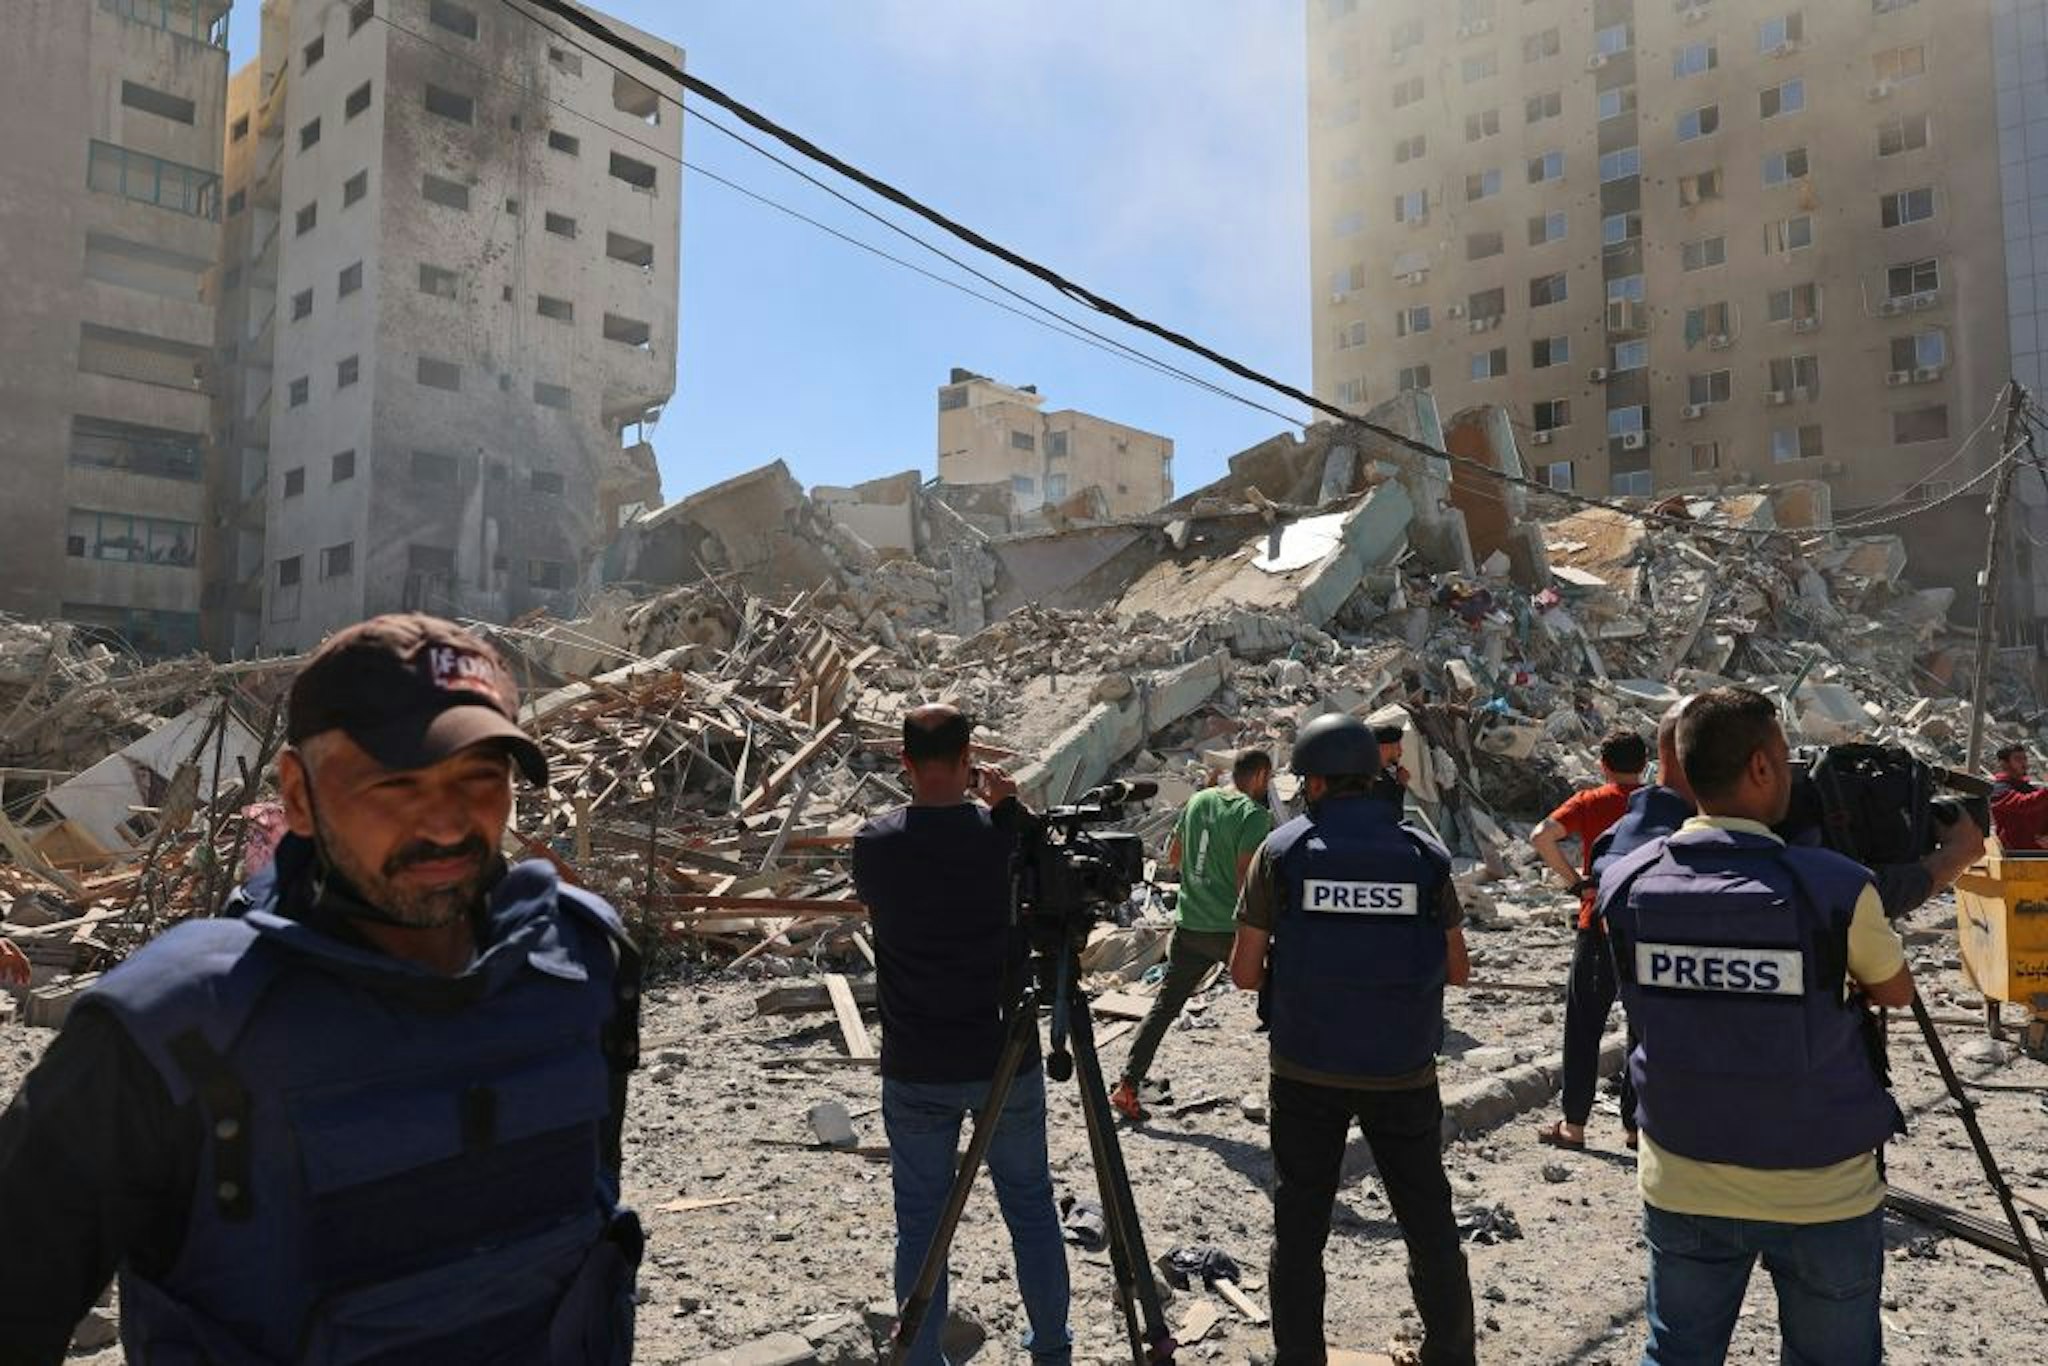 Palestinian journalists cover the destroyed Jala Tower, which was housing international press offices, following an Israeli airstrike in the Gaza Strip on May 15, 2021.